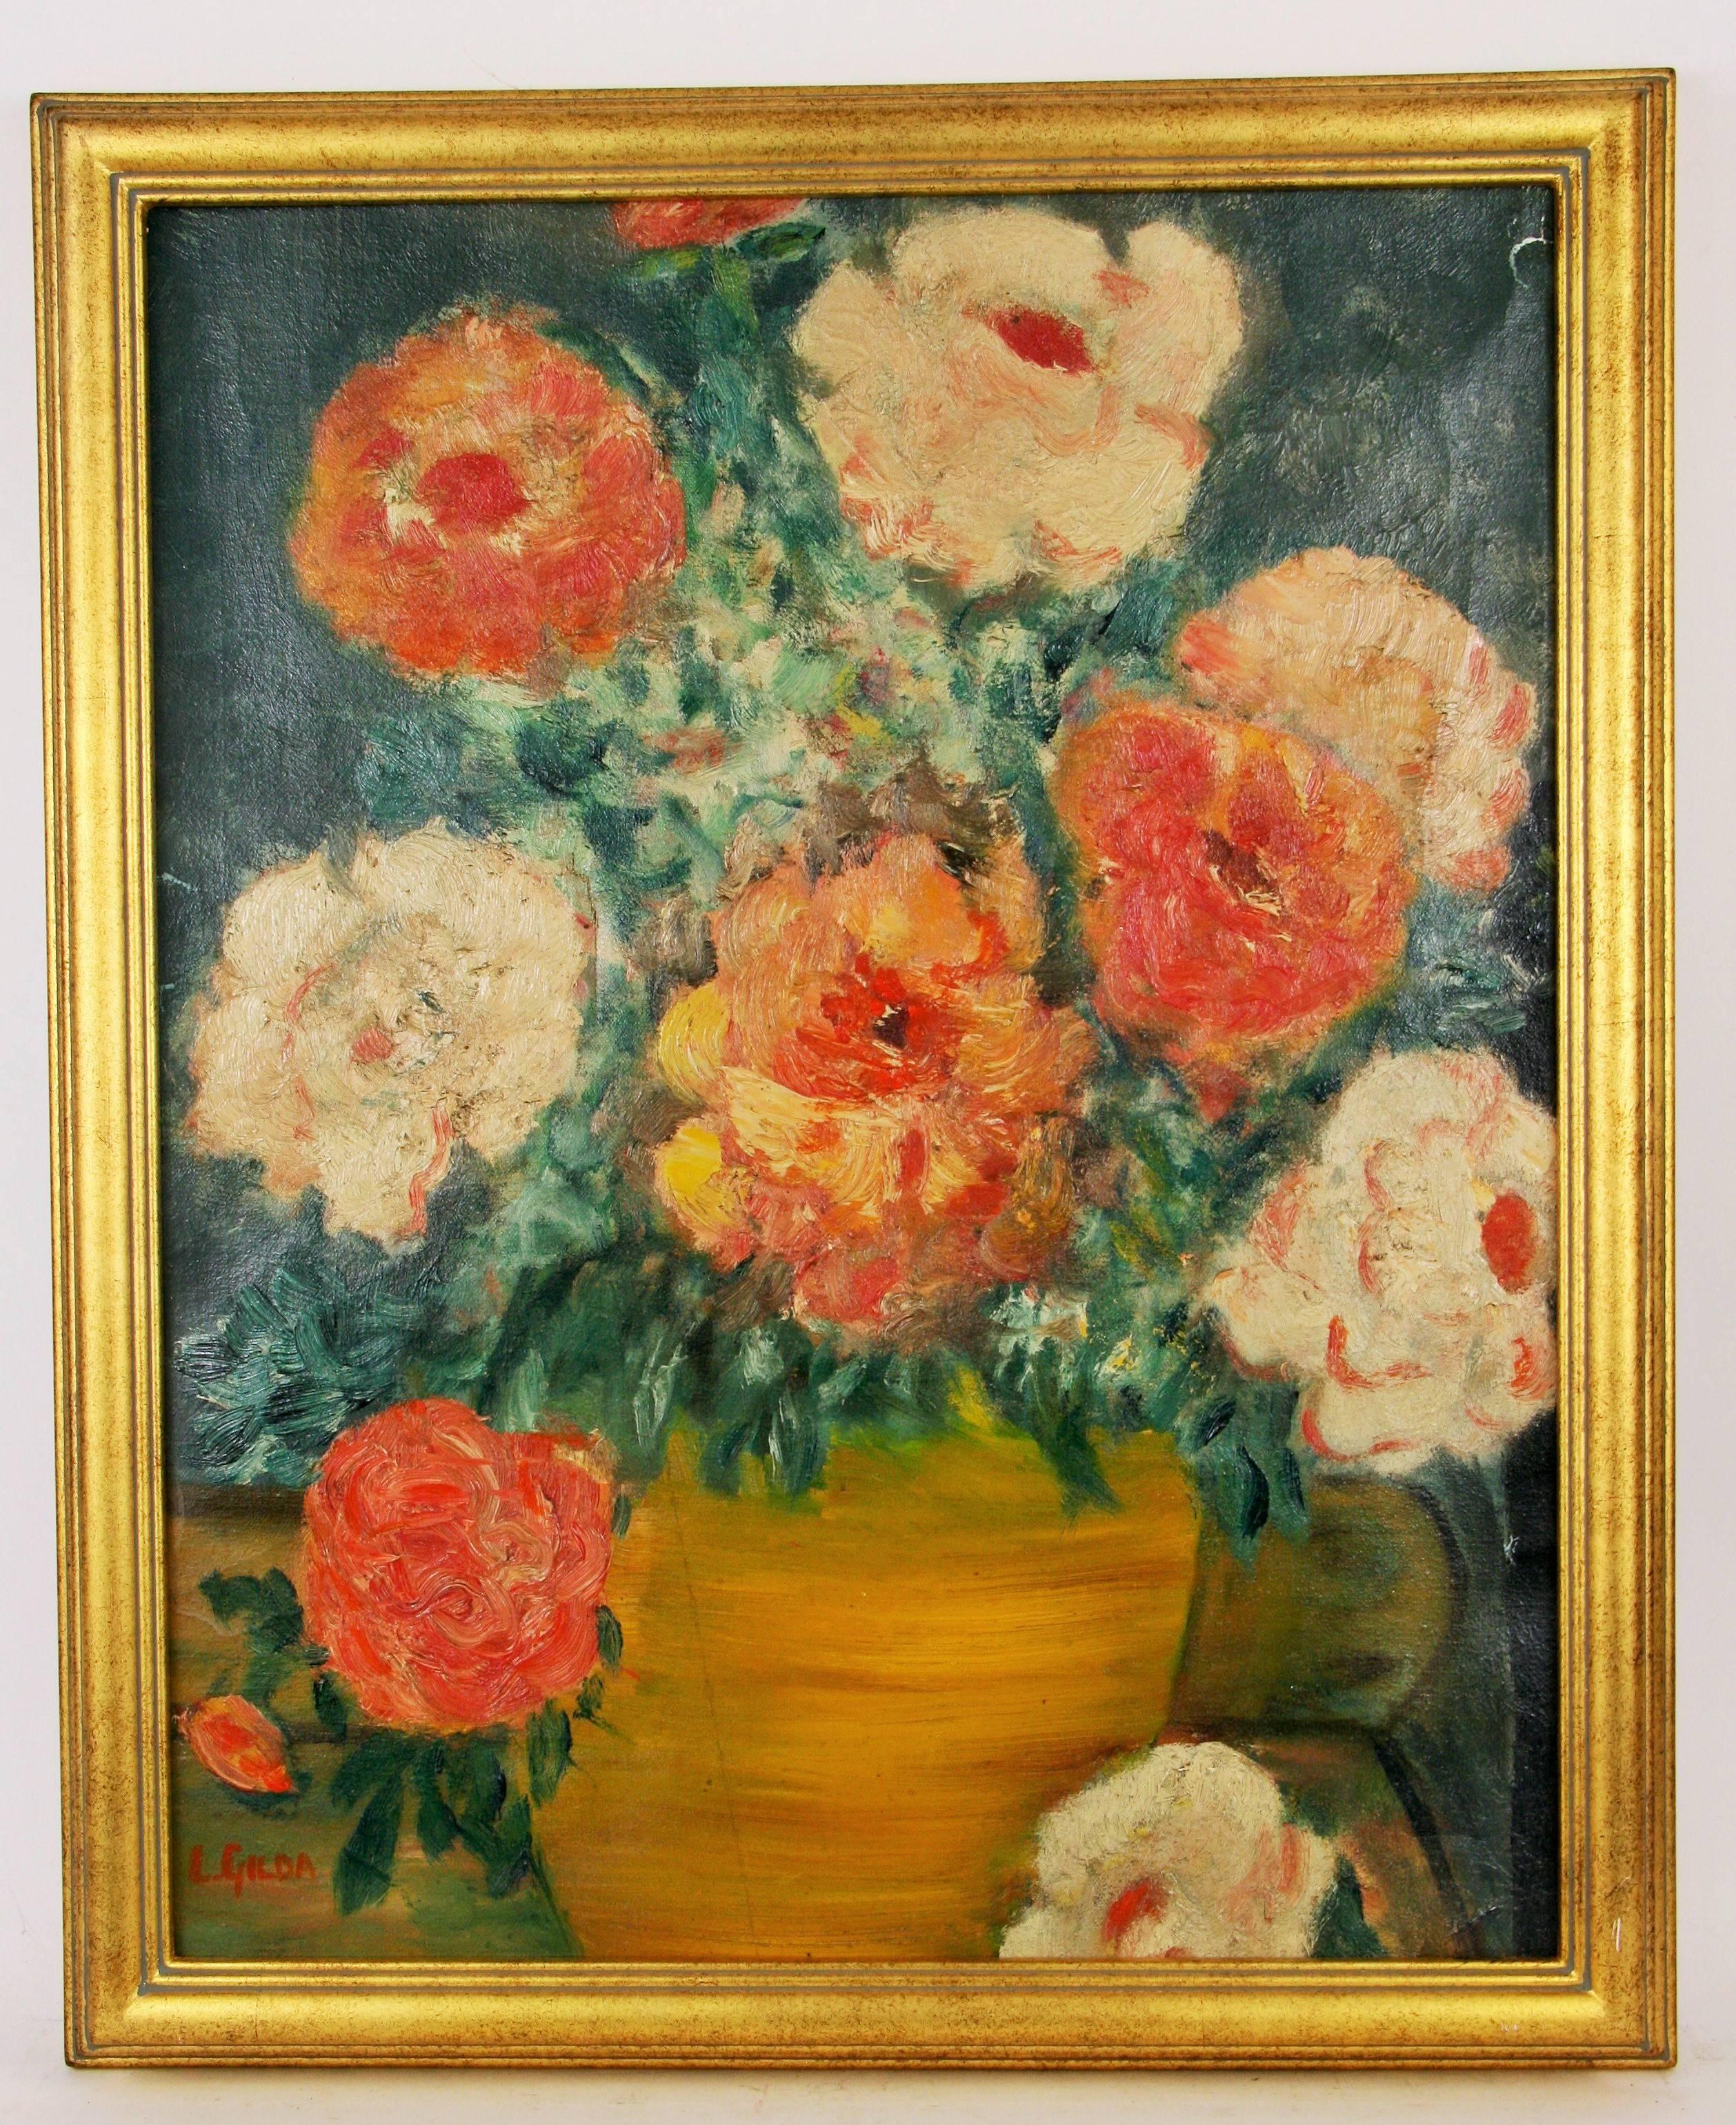 Impressionist Flowers Still Life - Brown Still-Life Painting by Unknown